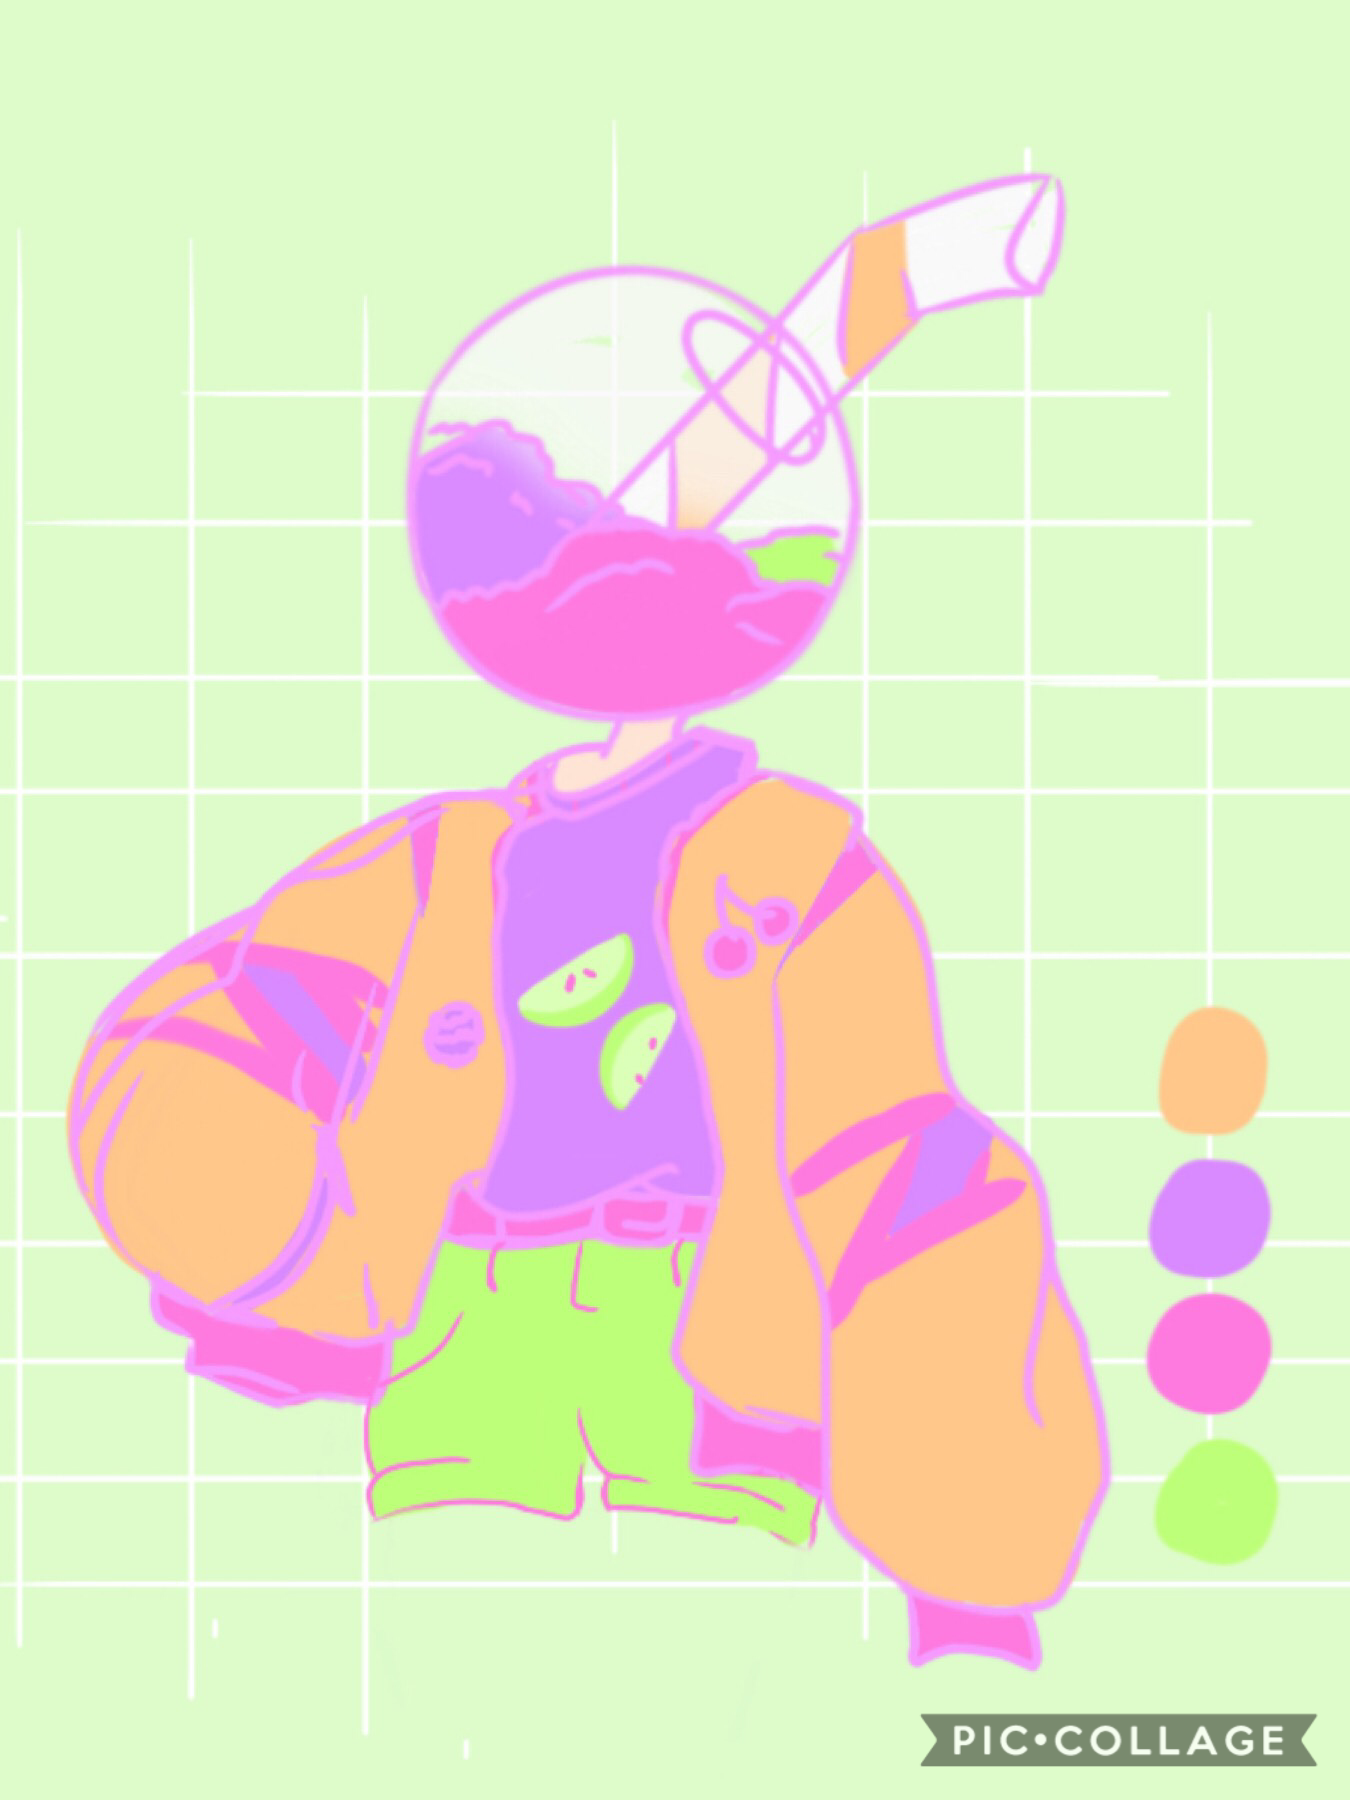 palette challenge from scorpioseas, made a bubbleboyo (tap)
bubbleheads are an open species from instagram, ill try to credit the original creator in the comments.